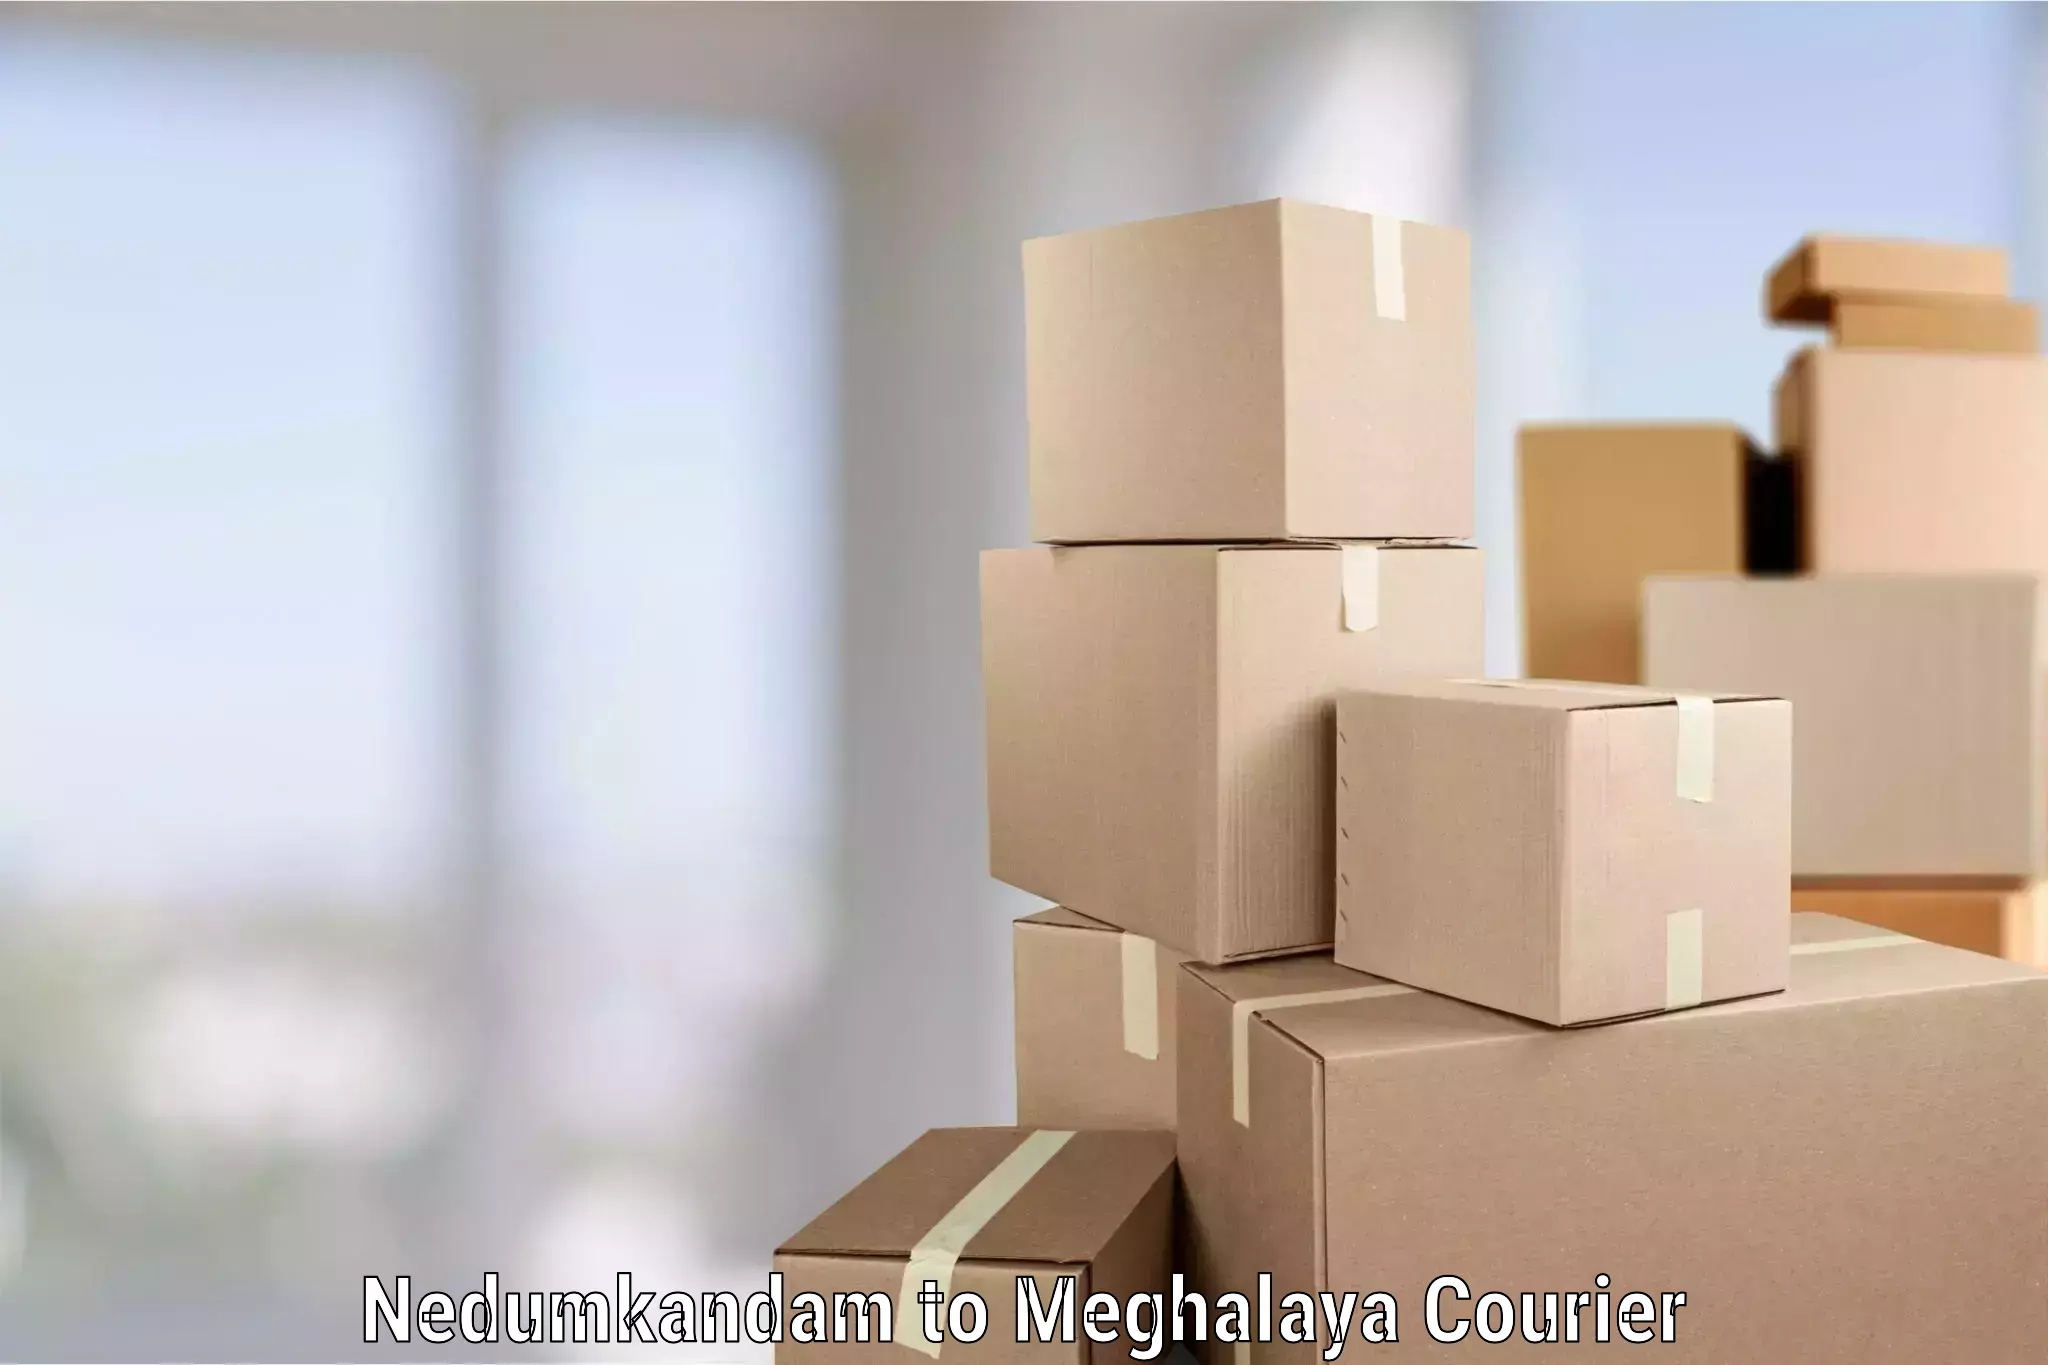 Moving and handling services in Nedumkandam to Meghalaya